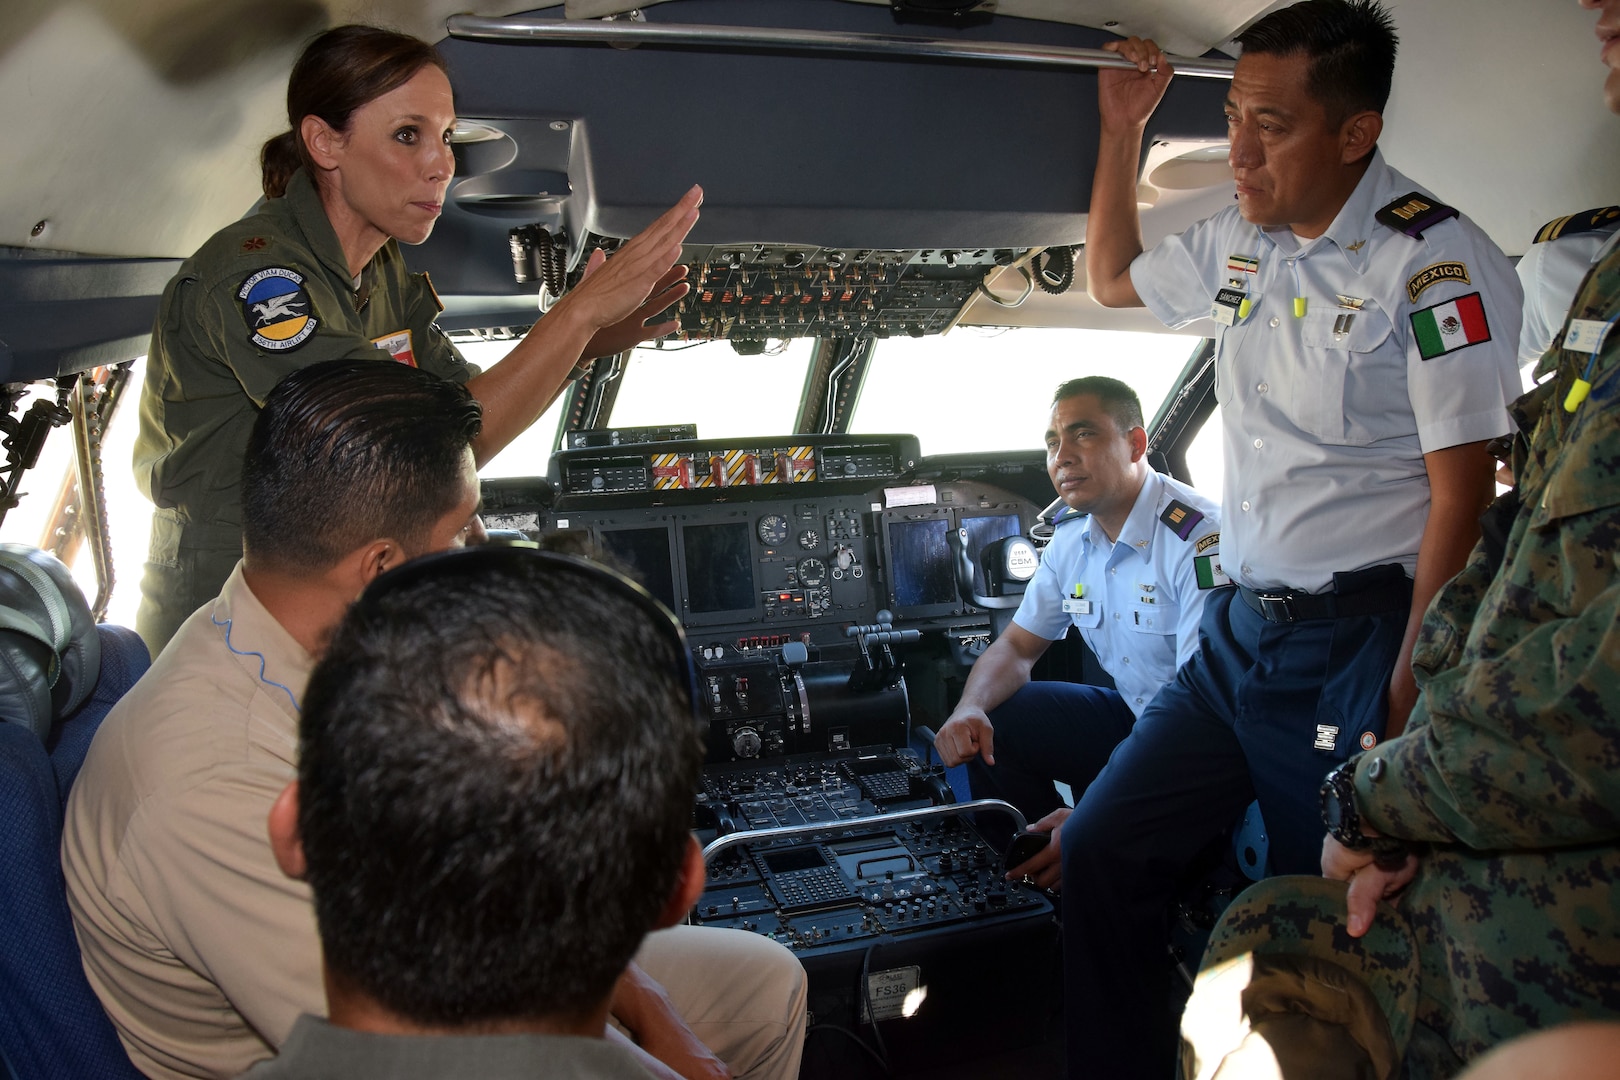 U.S. Air Force Maj. Brandi King, 356th Airlift Squadron C-5M Super Galaxy instructor pilot, talks with students from the Inter-American Air Forces Academy July 18 at Joint Base San Antonio-Lackland. The students are senior maintenance officers in their respective countries’ air forces from Latin America.